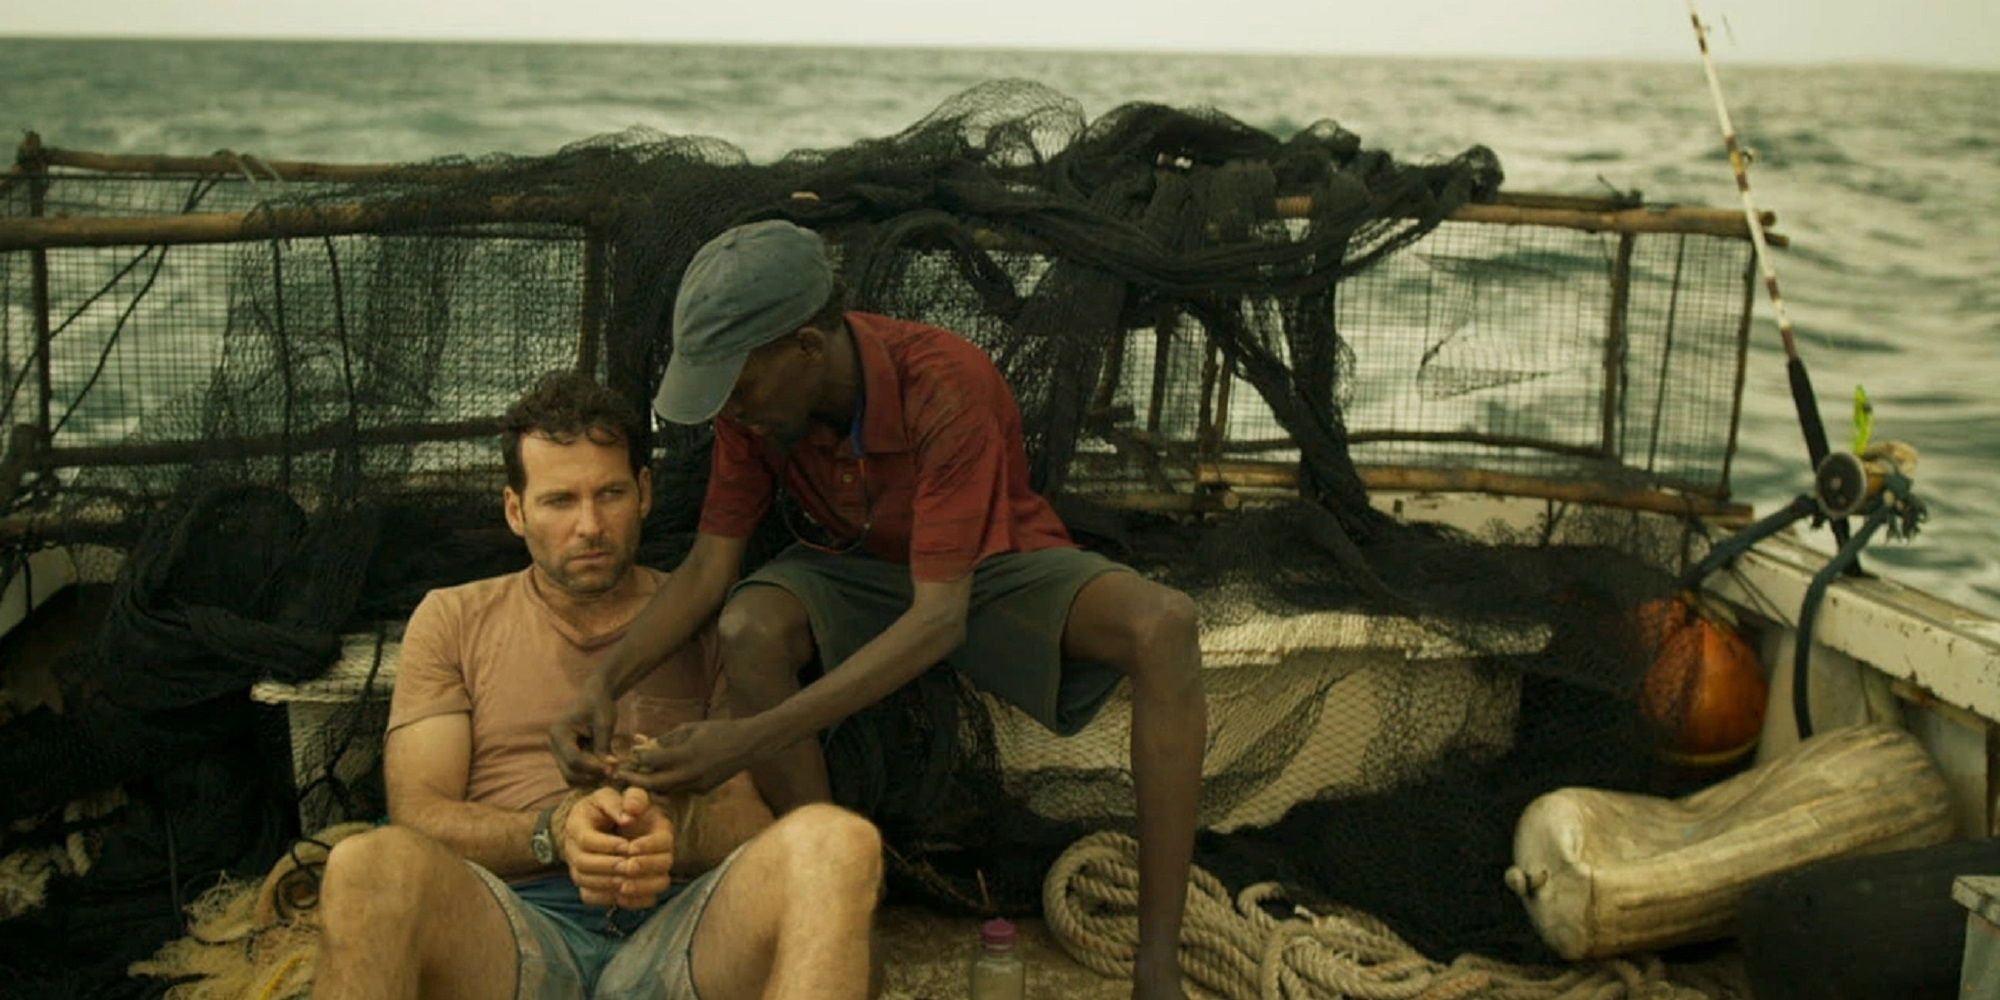 Eion Bailey being captured by Barkhad Abdi on a boat in Extortion.